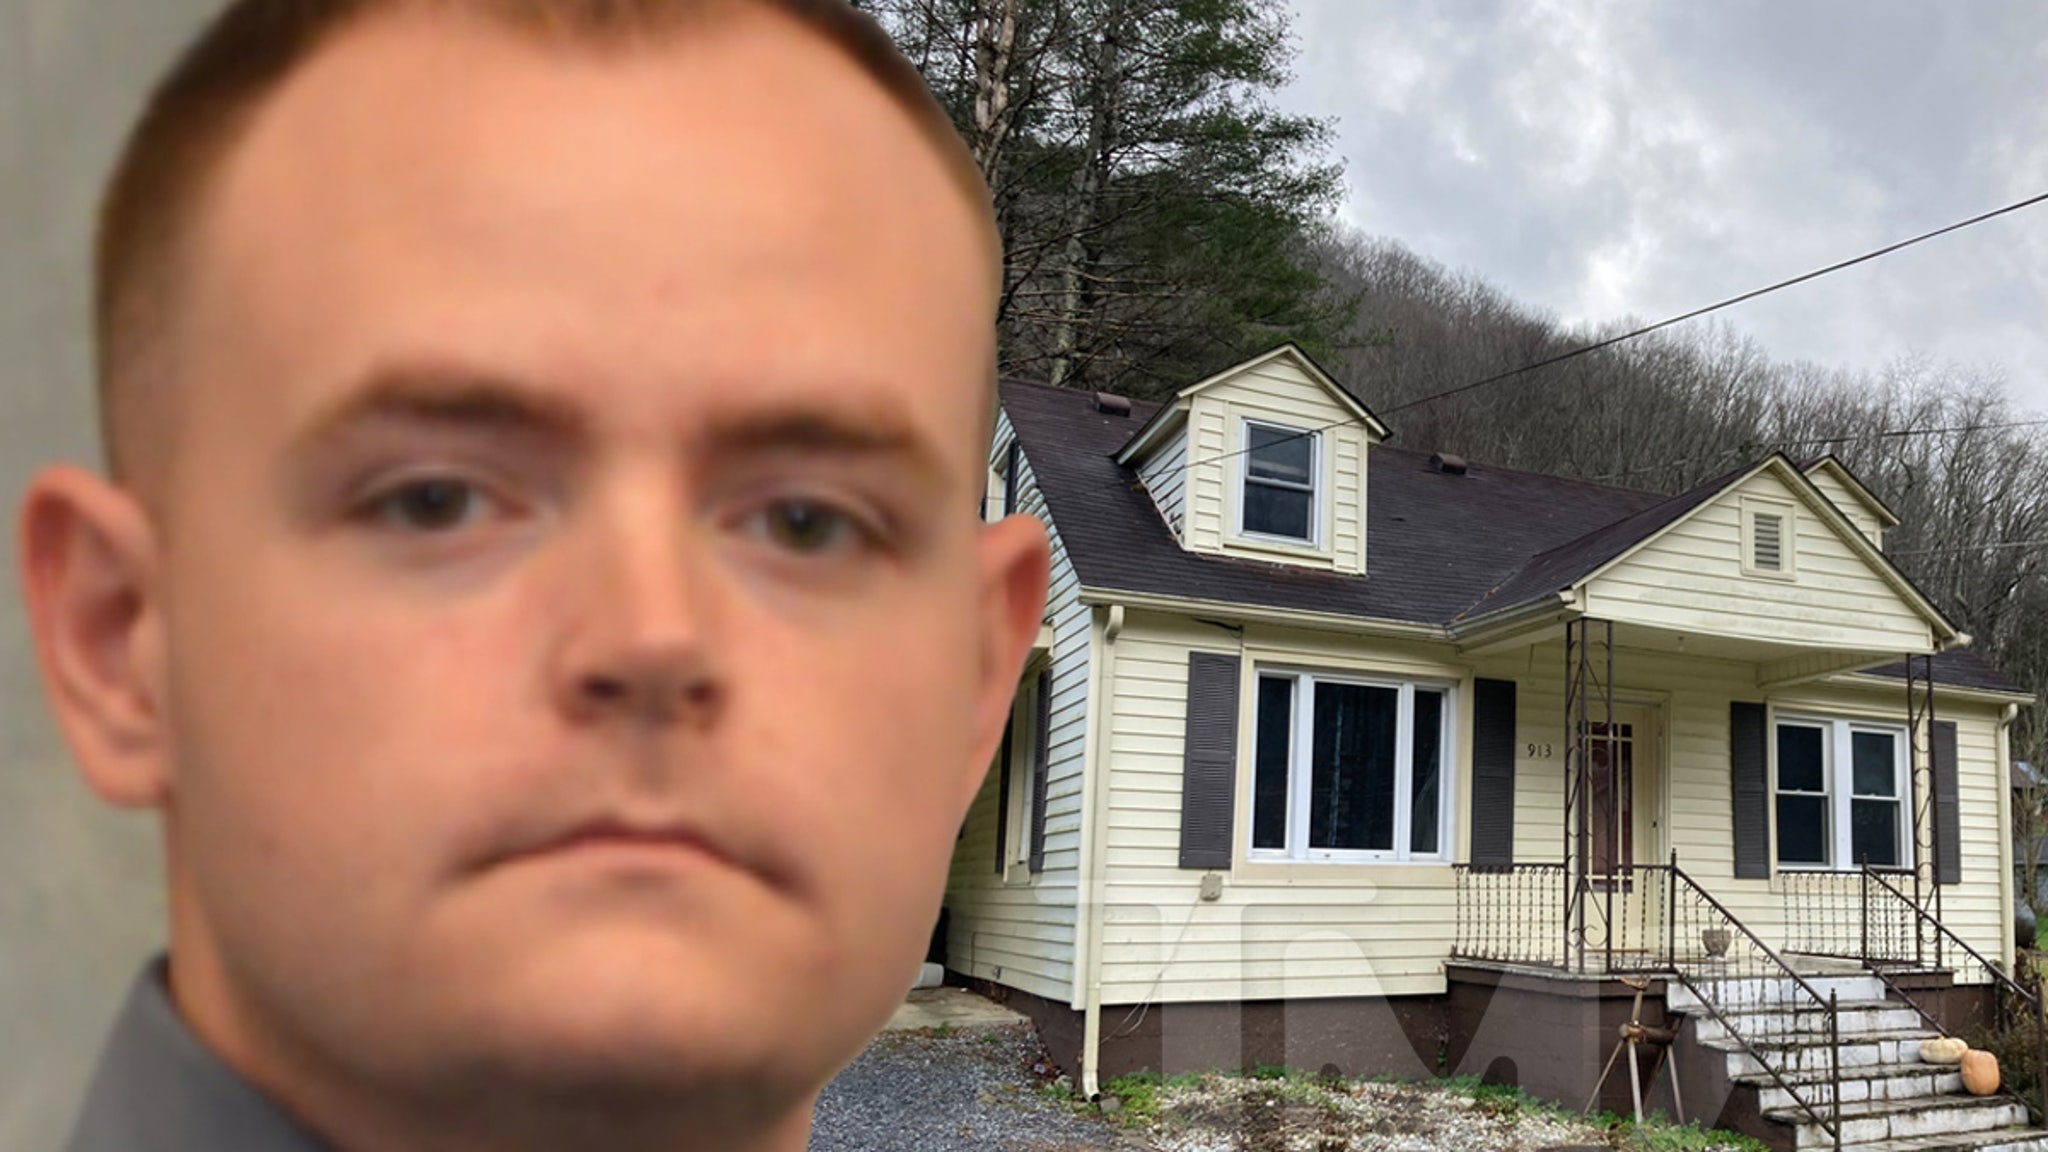 ‘Catfish’ Murderer Austin Lee Edwards Blacked Out Windows at New Home Before Killings